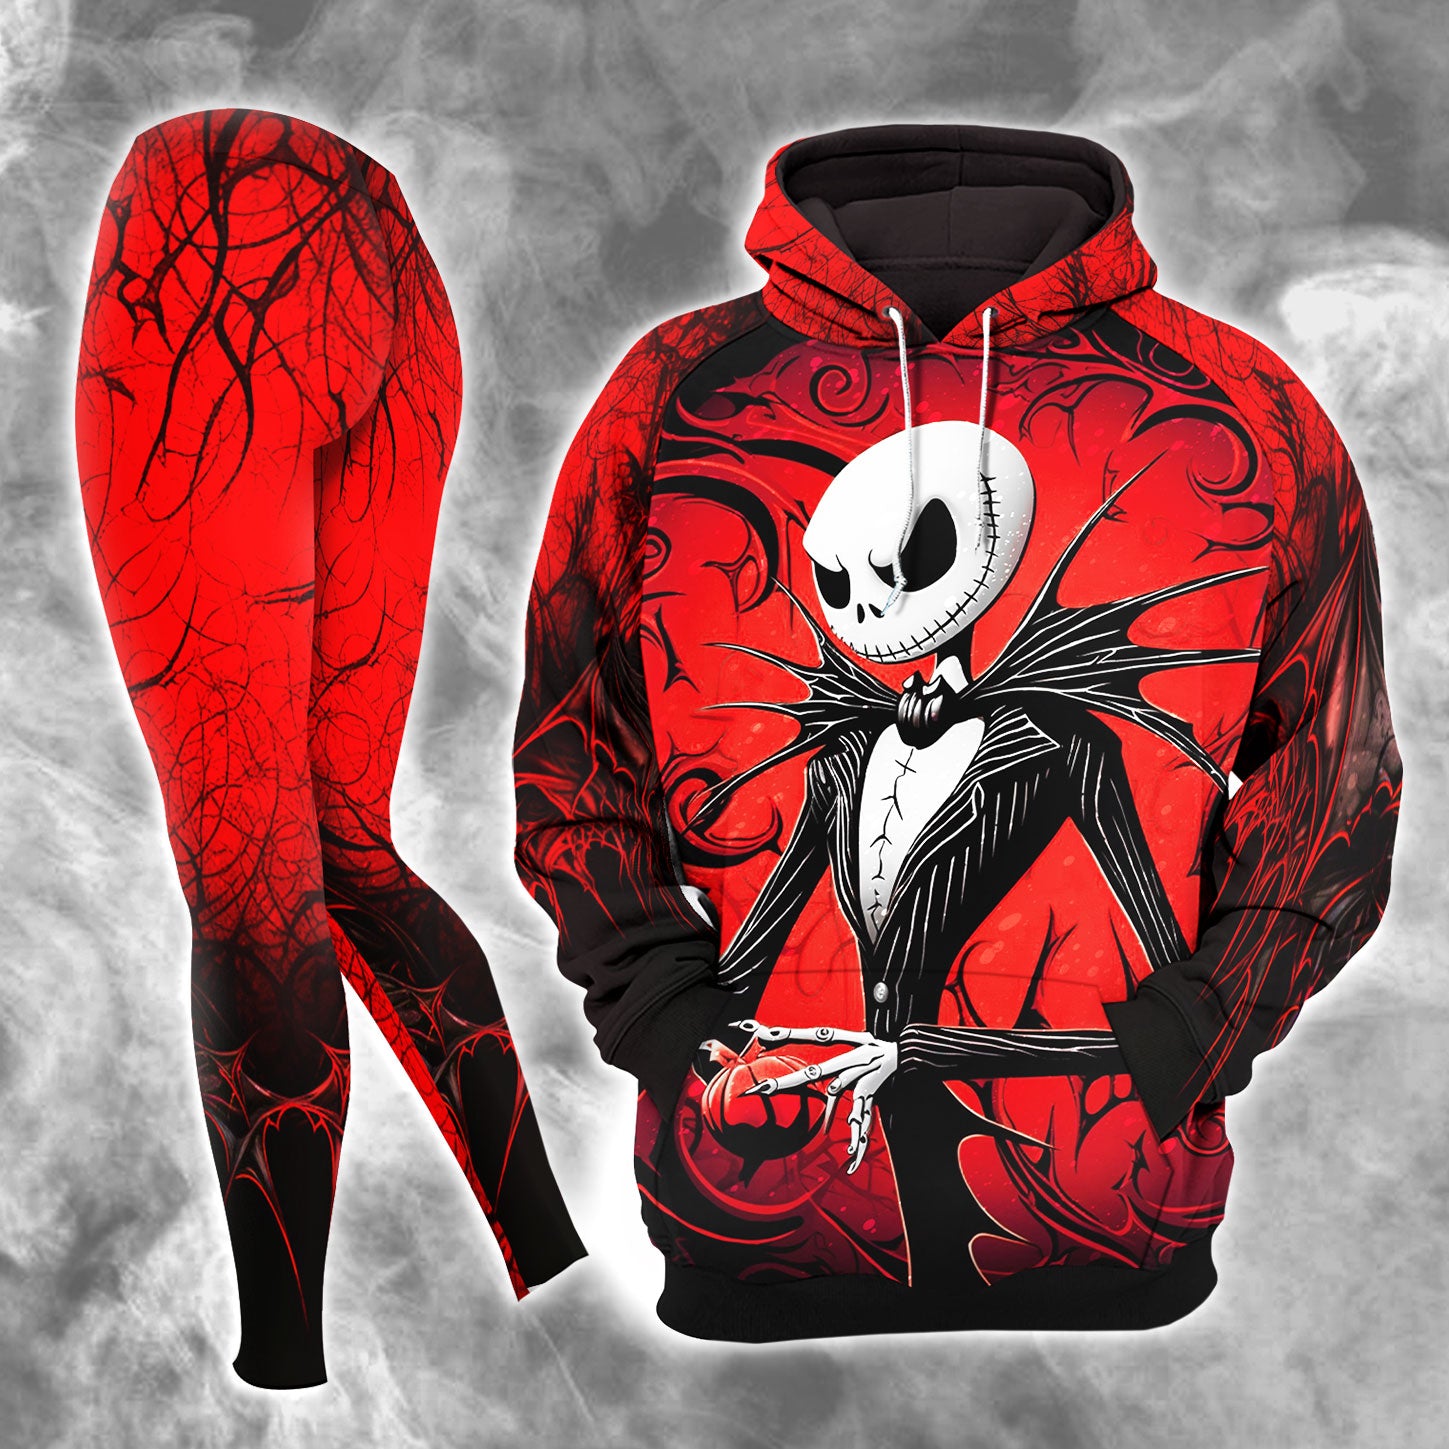 Black Red Nightmare Gothic Combo Hoodie and Leggings - Dark and edgy matching set with skull designs for a unique and stylish look.